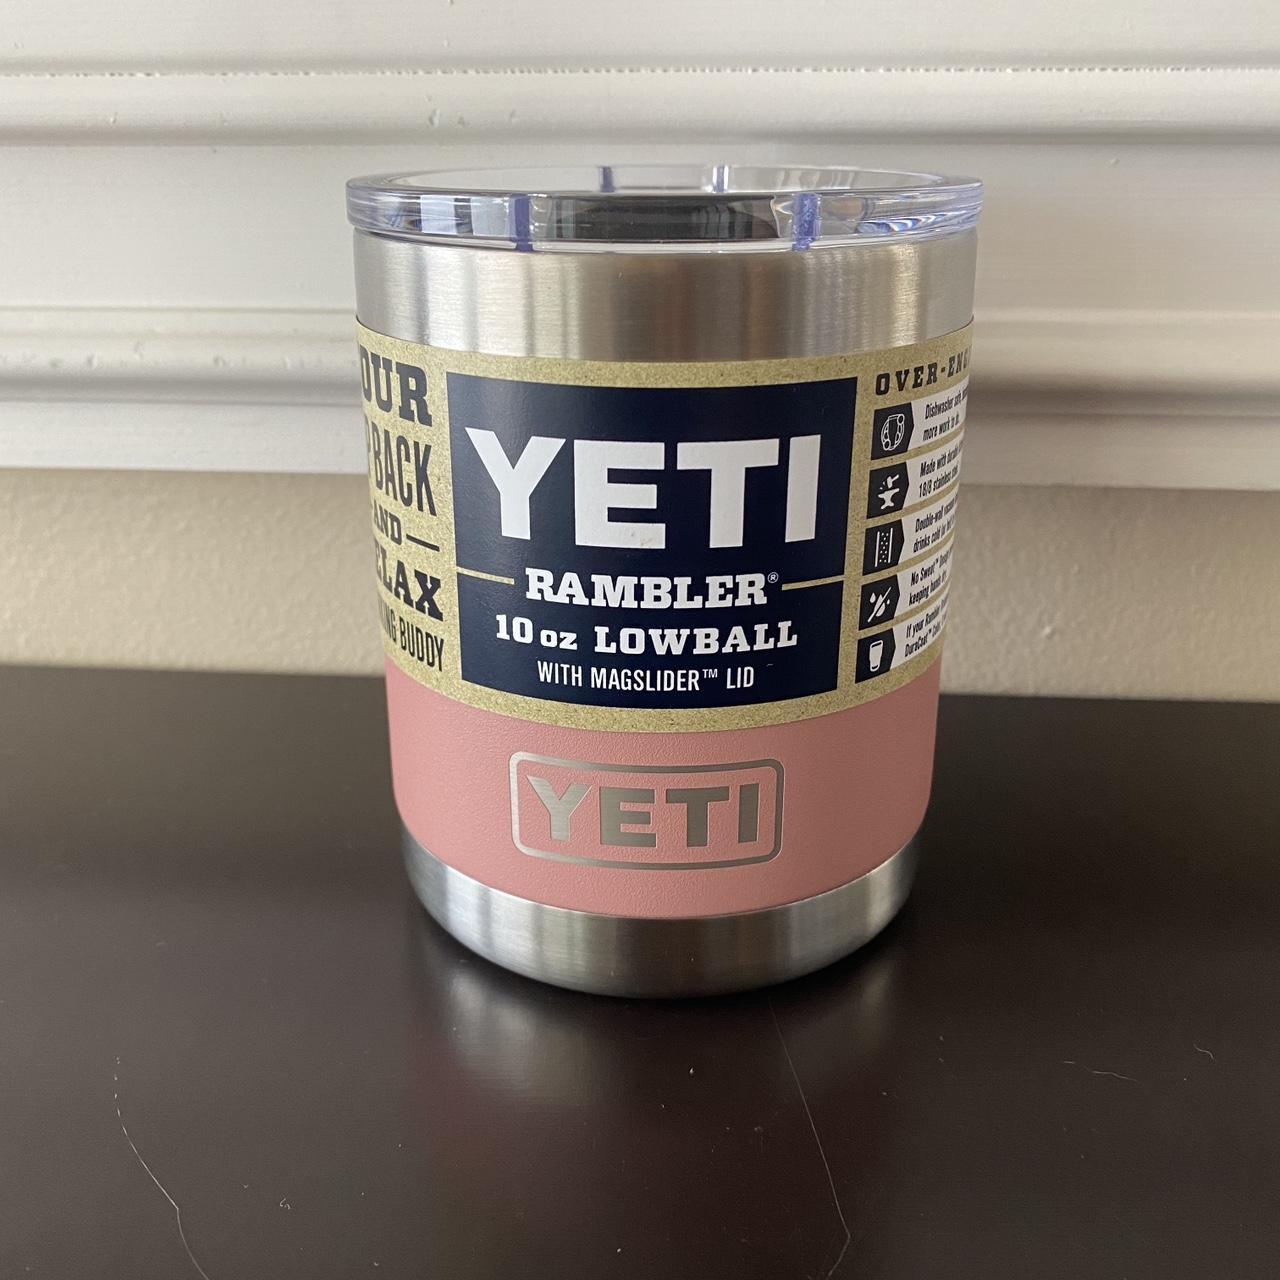 Check out the new sandstone pink by @yeti 🙌🏻 #tumbler #cups #newarrivals  #weship📦 #favorite #rambler #ohyeah #justin #delriofeed